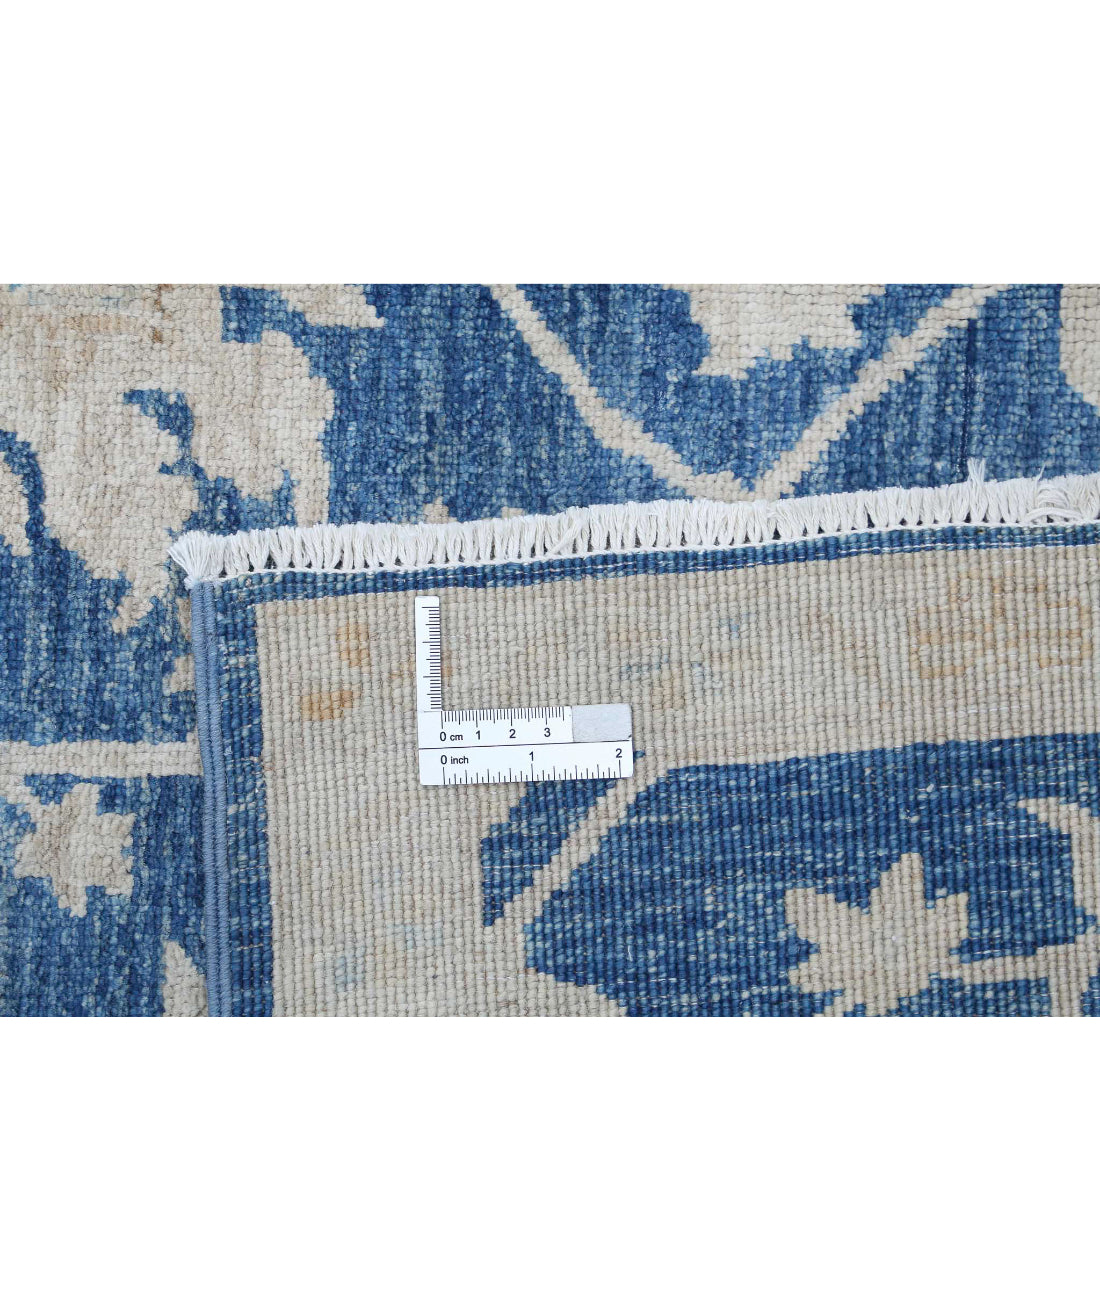 Hand Knotted Artemix Wool Rug - 4'11'' x 9'4'' 4'11'' x 9'4'' (148 X 280) / Blue / Ivory